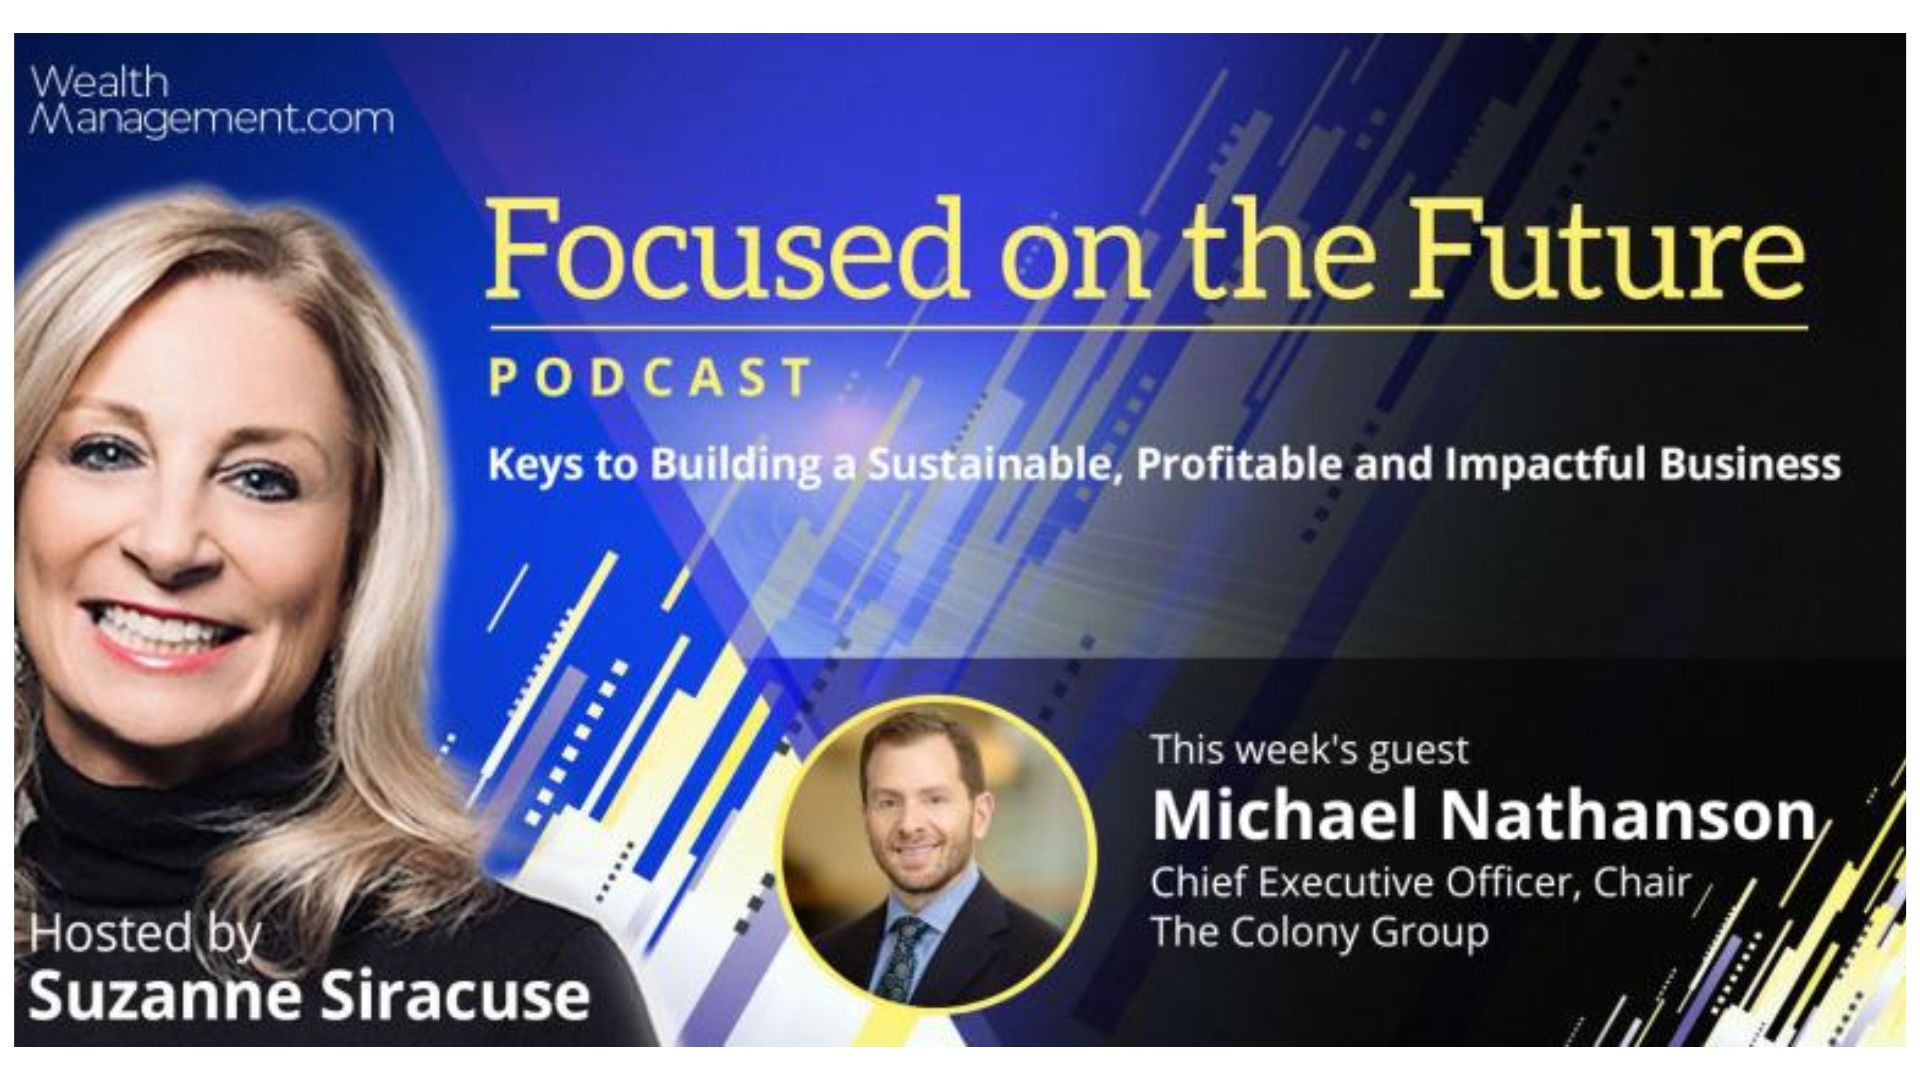 Focused on the Future Michael Nathanson on Retaining Top Talent through Purpose, Sustainability and Culture - Podcast Cover